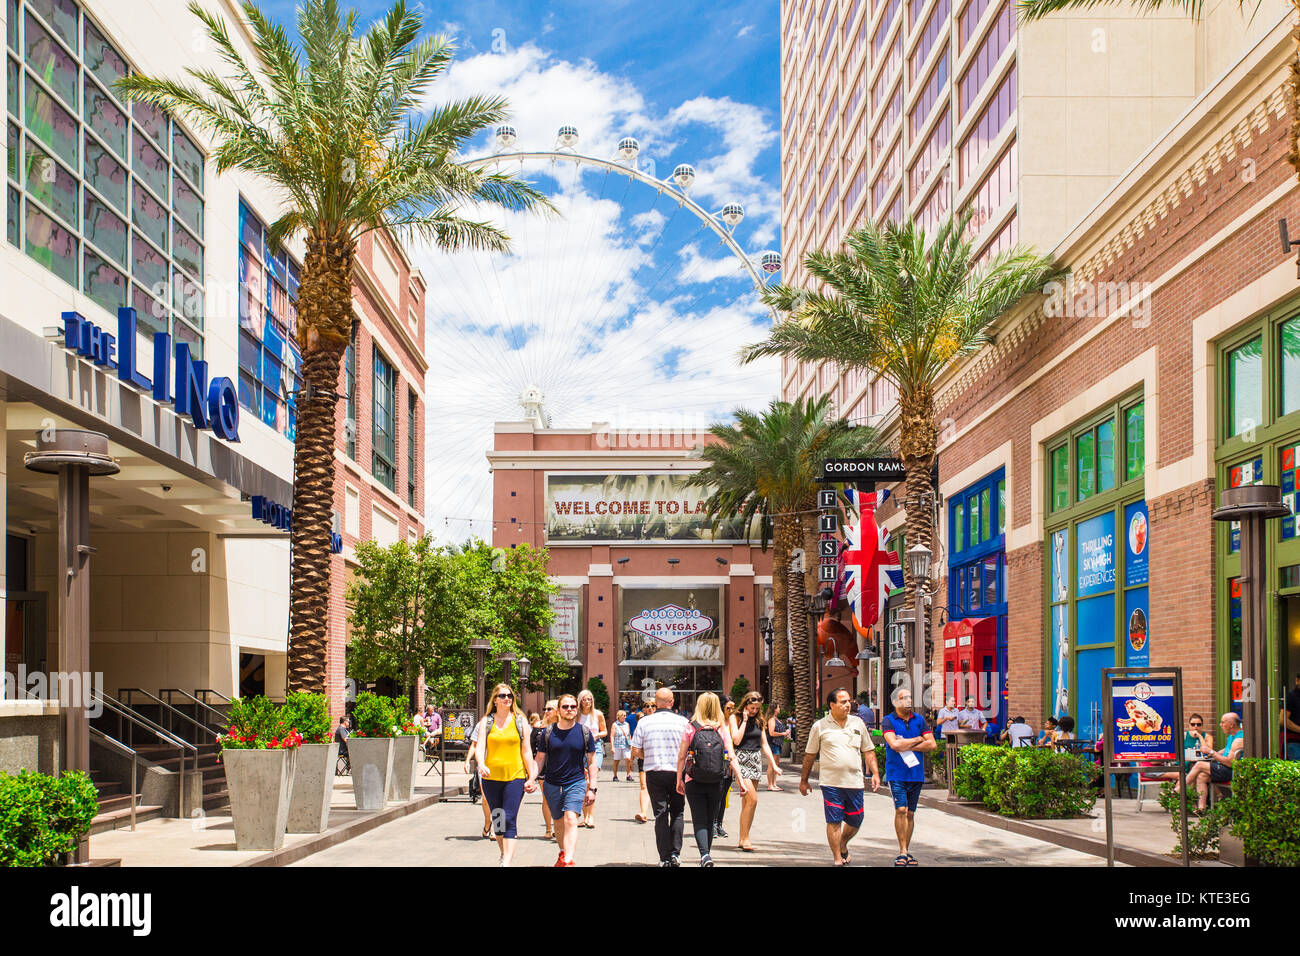 LAS VEGAS, NEVADA - MAY 18, 2017: View of outdoor Linq Promenade pedestrian plaza off the Vegas Strip with people in view. Stock Photo